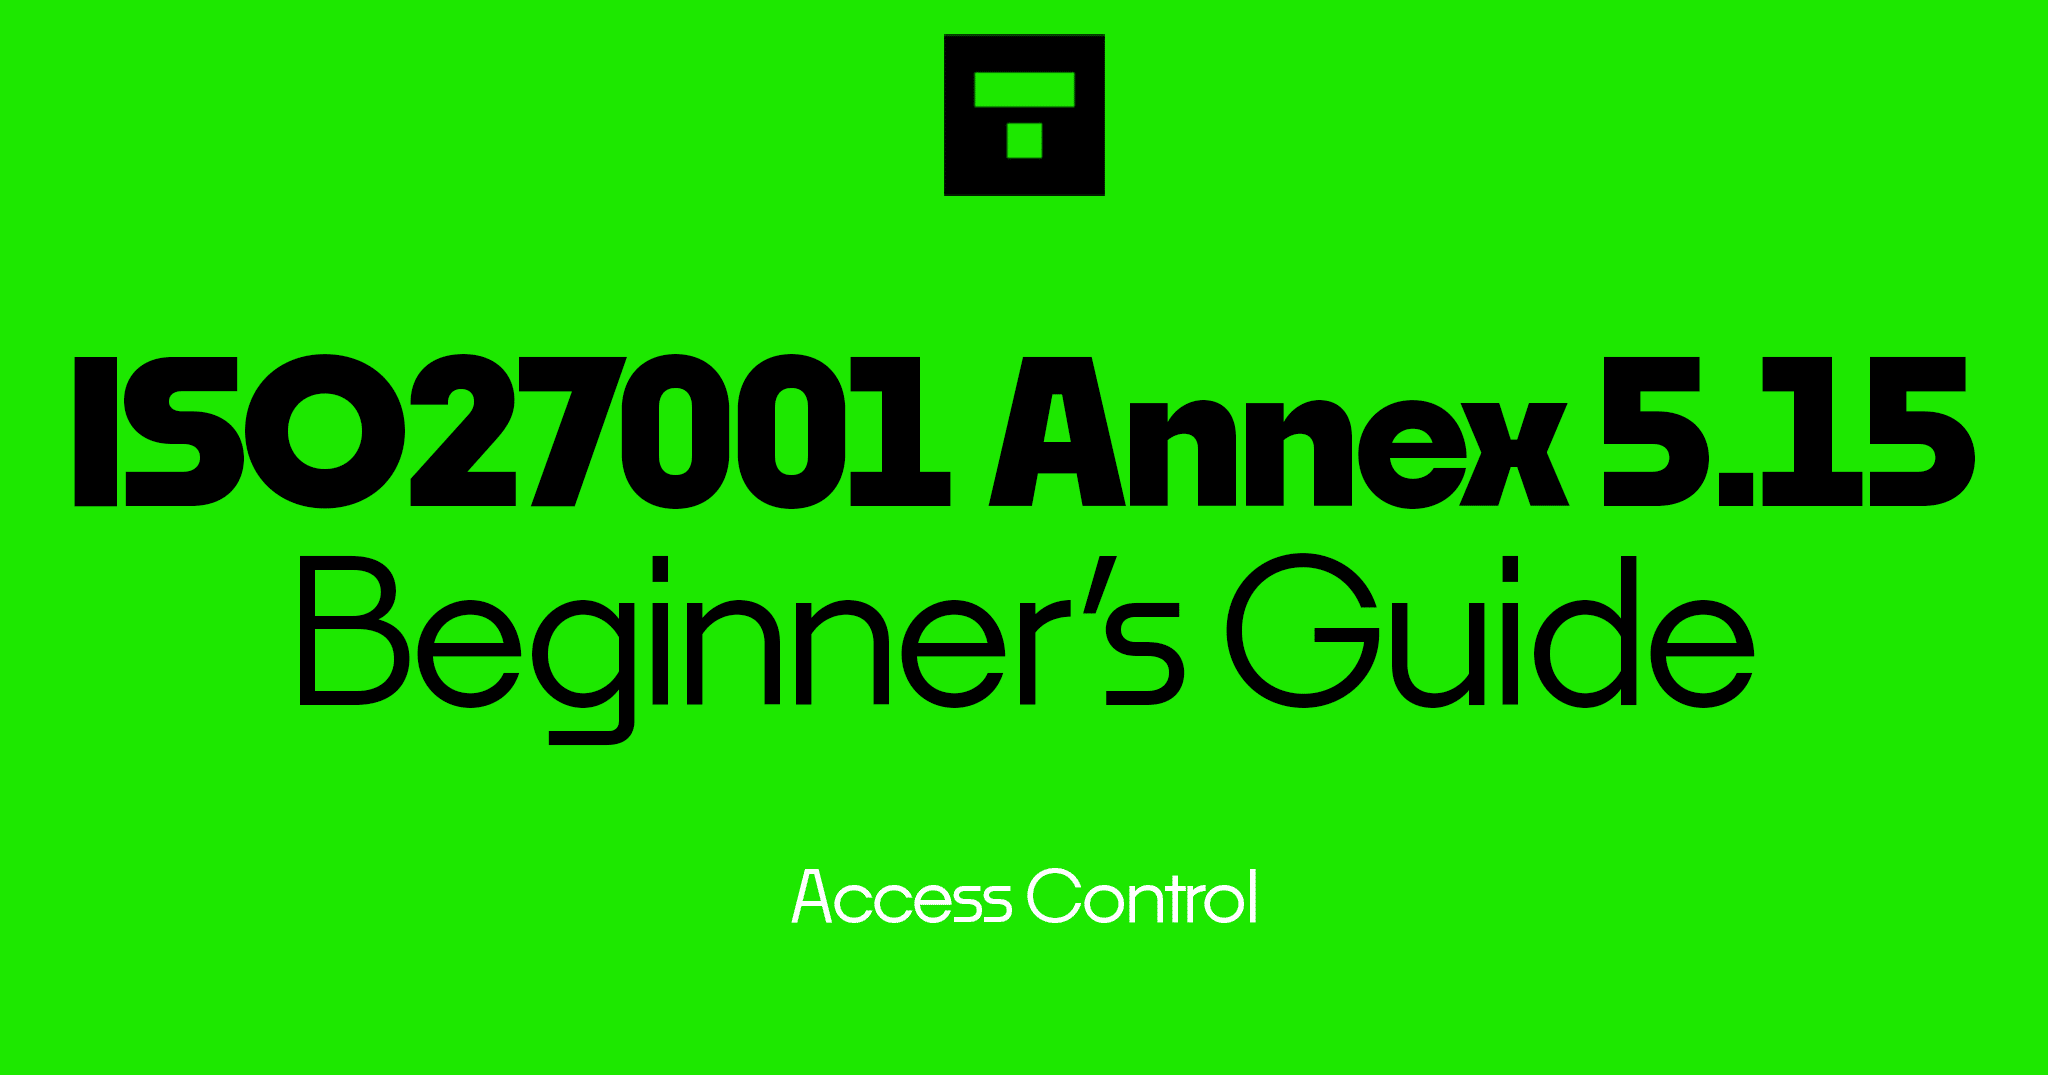 How To Implement ISO 27001 Annex A 5.15 Access Control